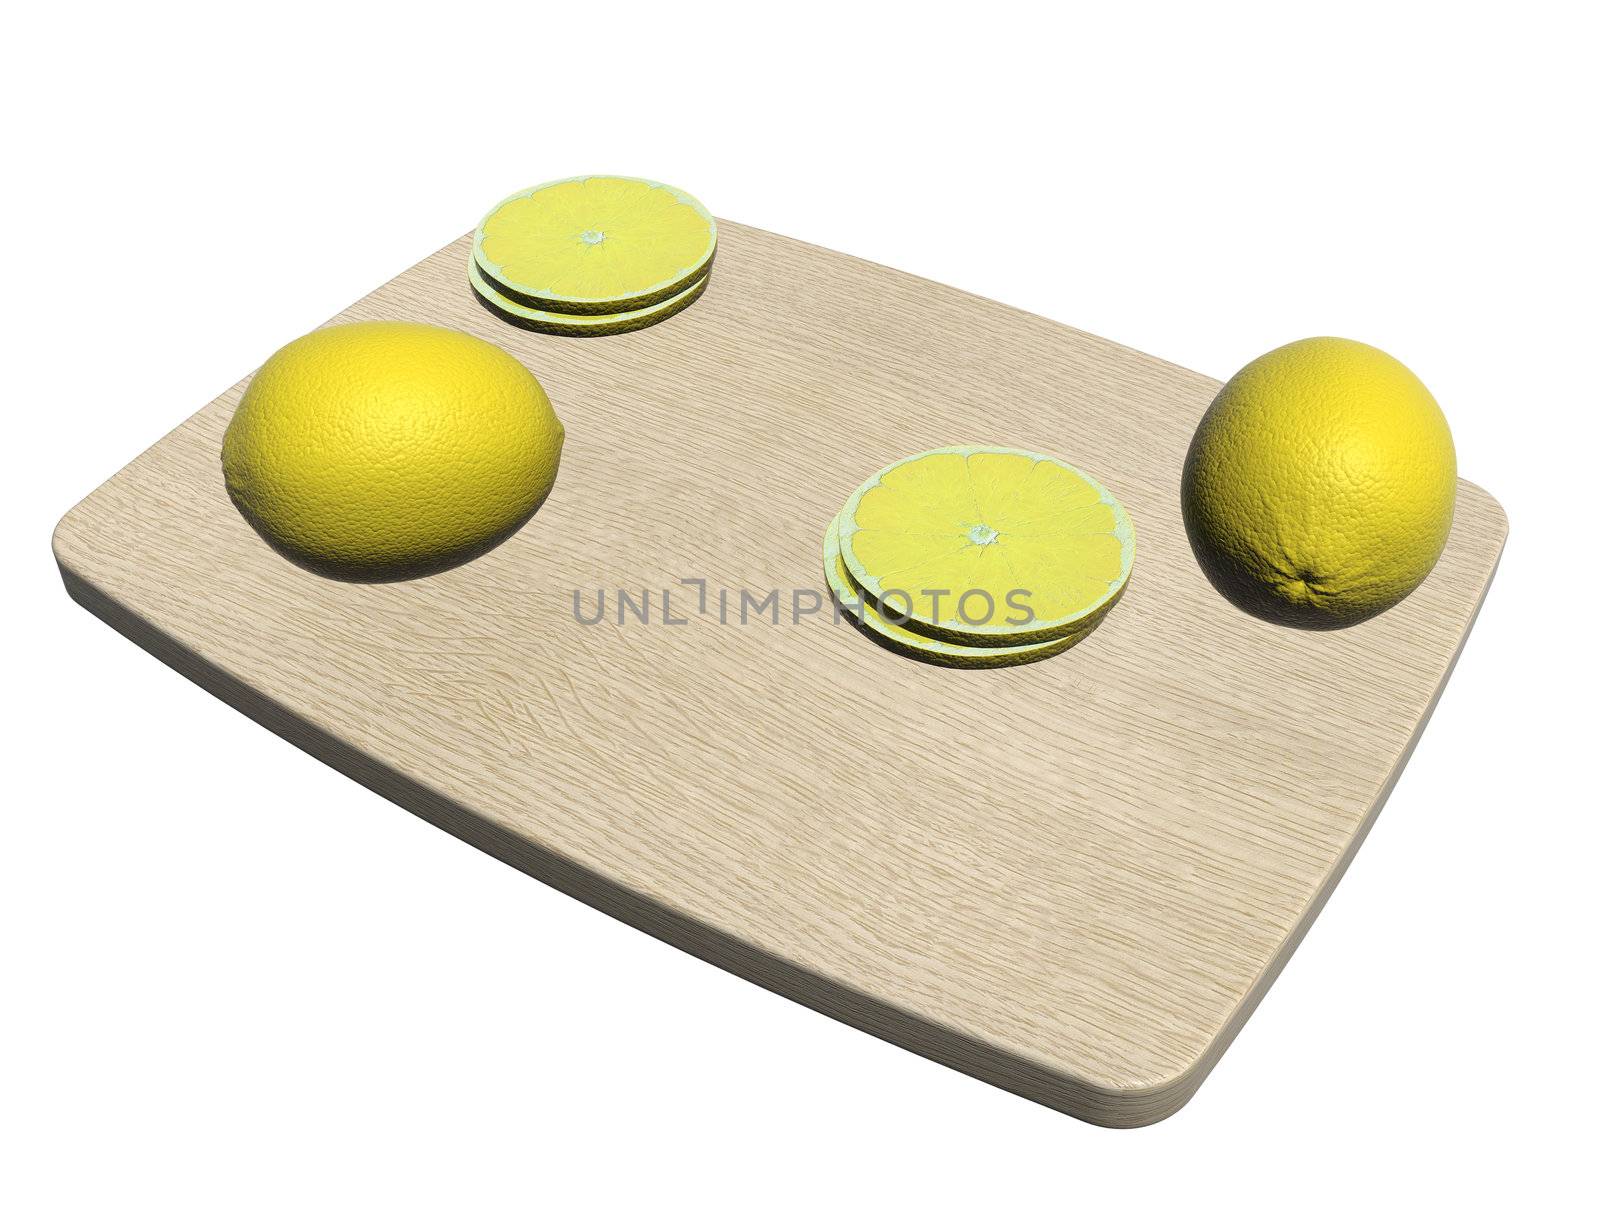 Rectangular wooden cutting board with whole and sliced lemon, 3d by Morphart